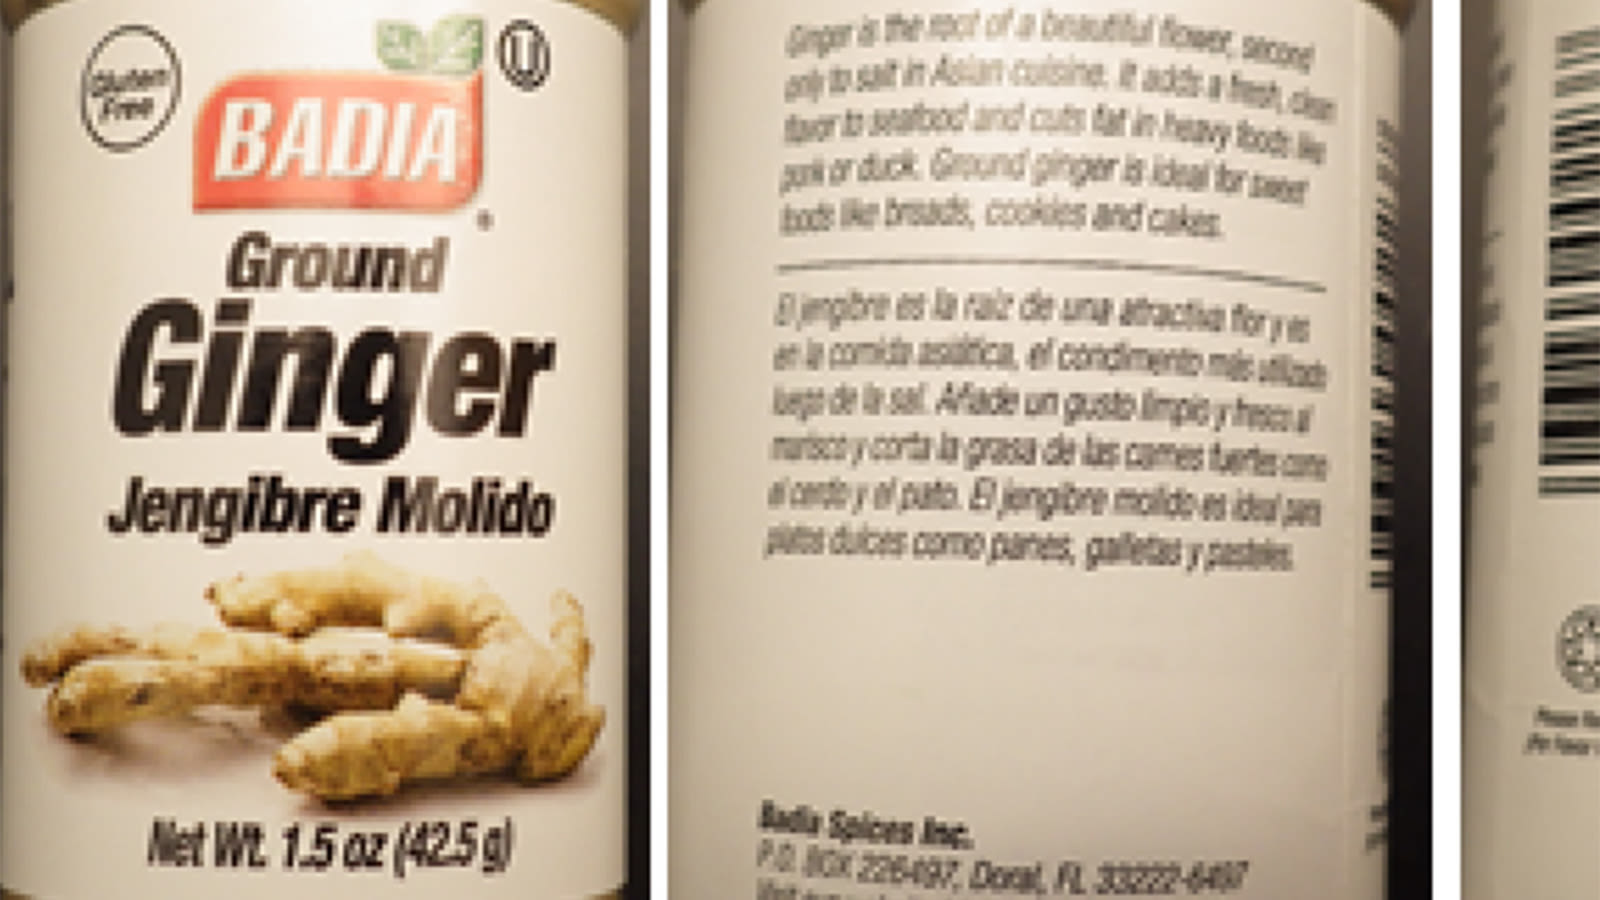 Consumer alert issued for elevated levels of lead found in Badia Spices Ground Ginger, Cinnamon